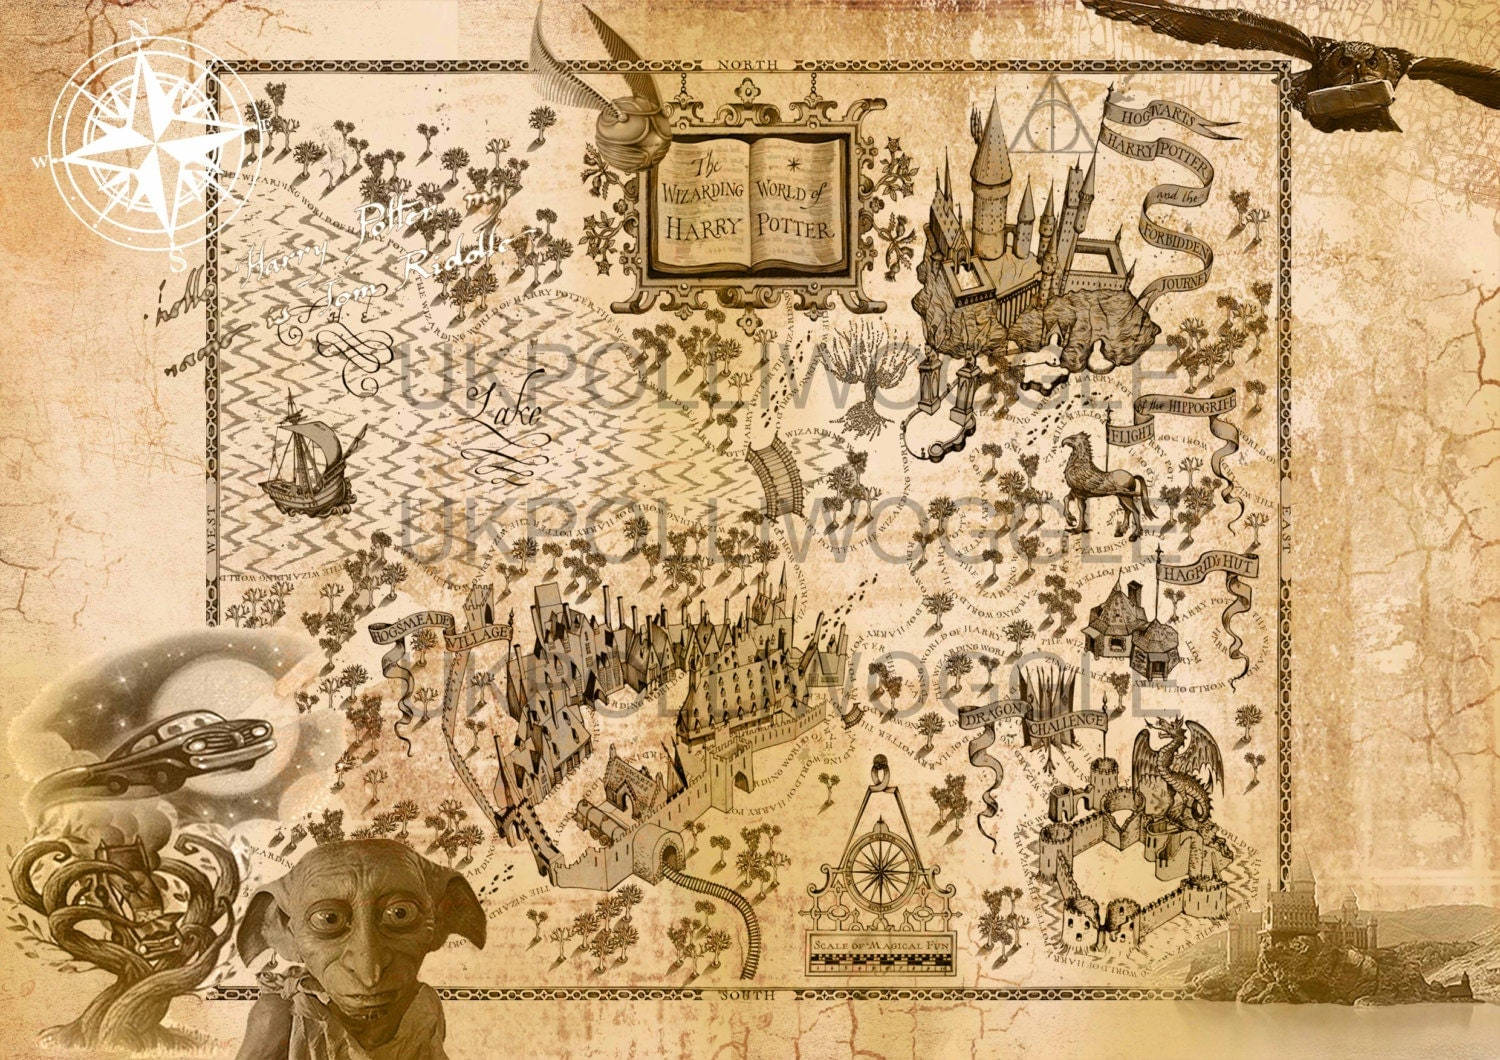 Caption: The Mystical Marauder's Map With Dobby In Action. Background